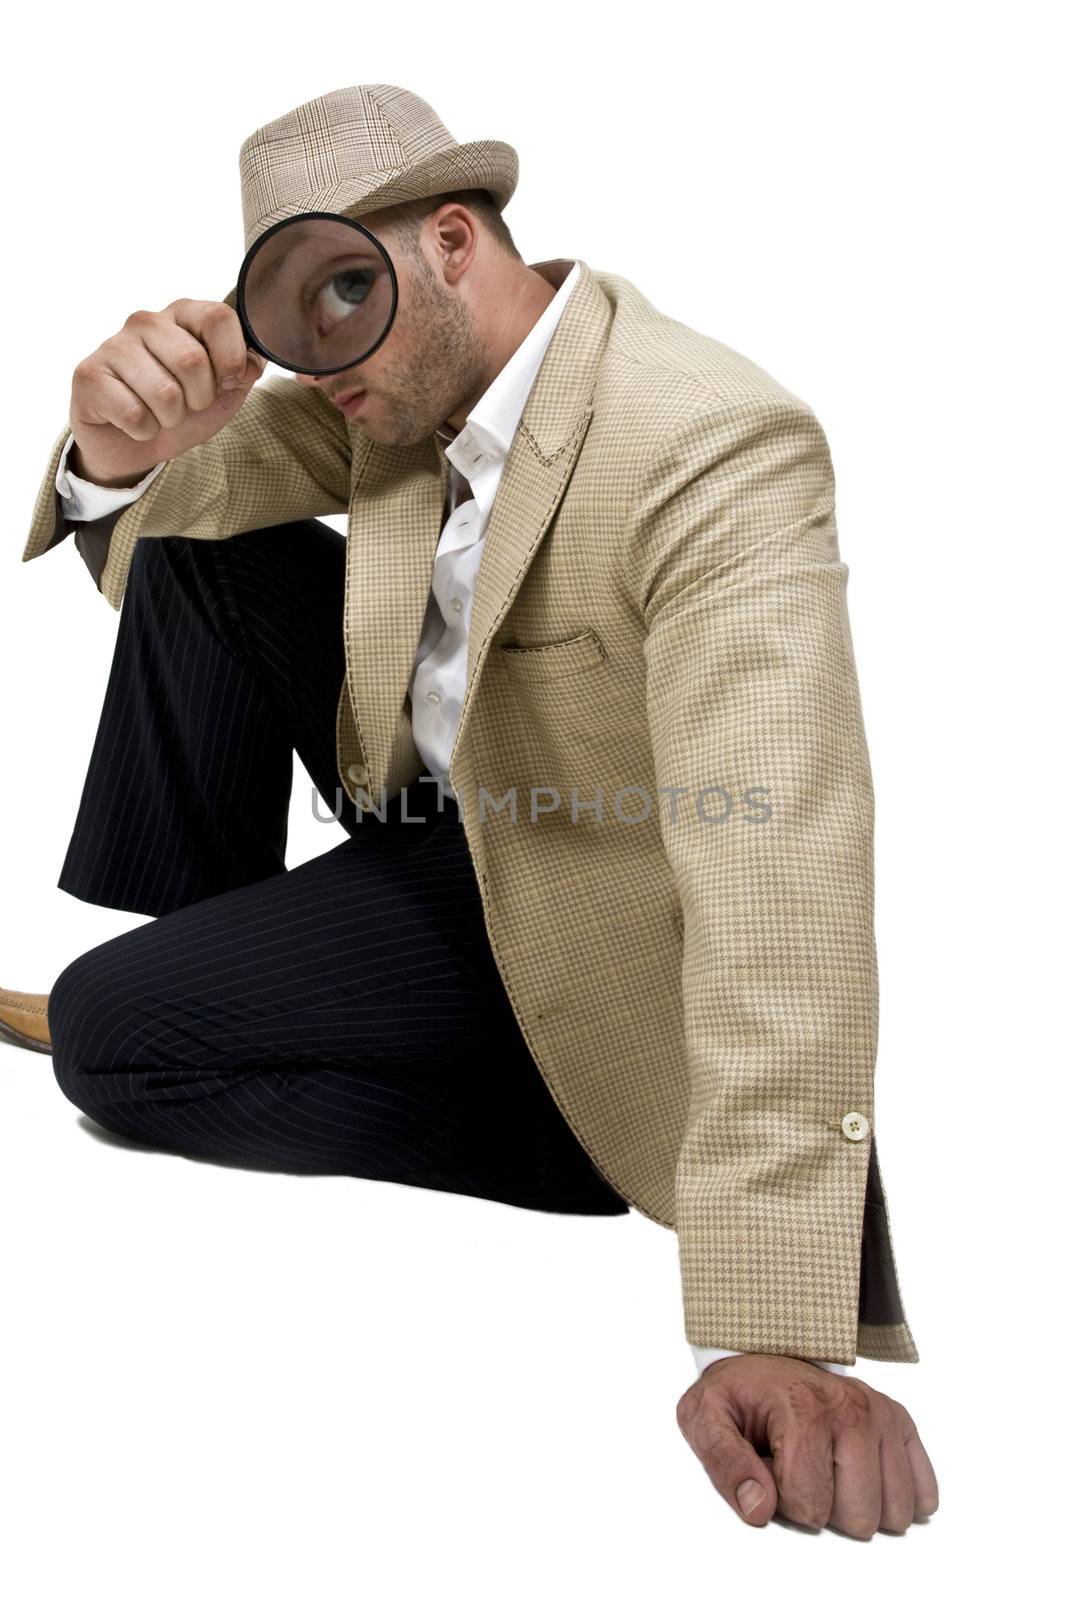 detective and magnifier on isolated background
